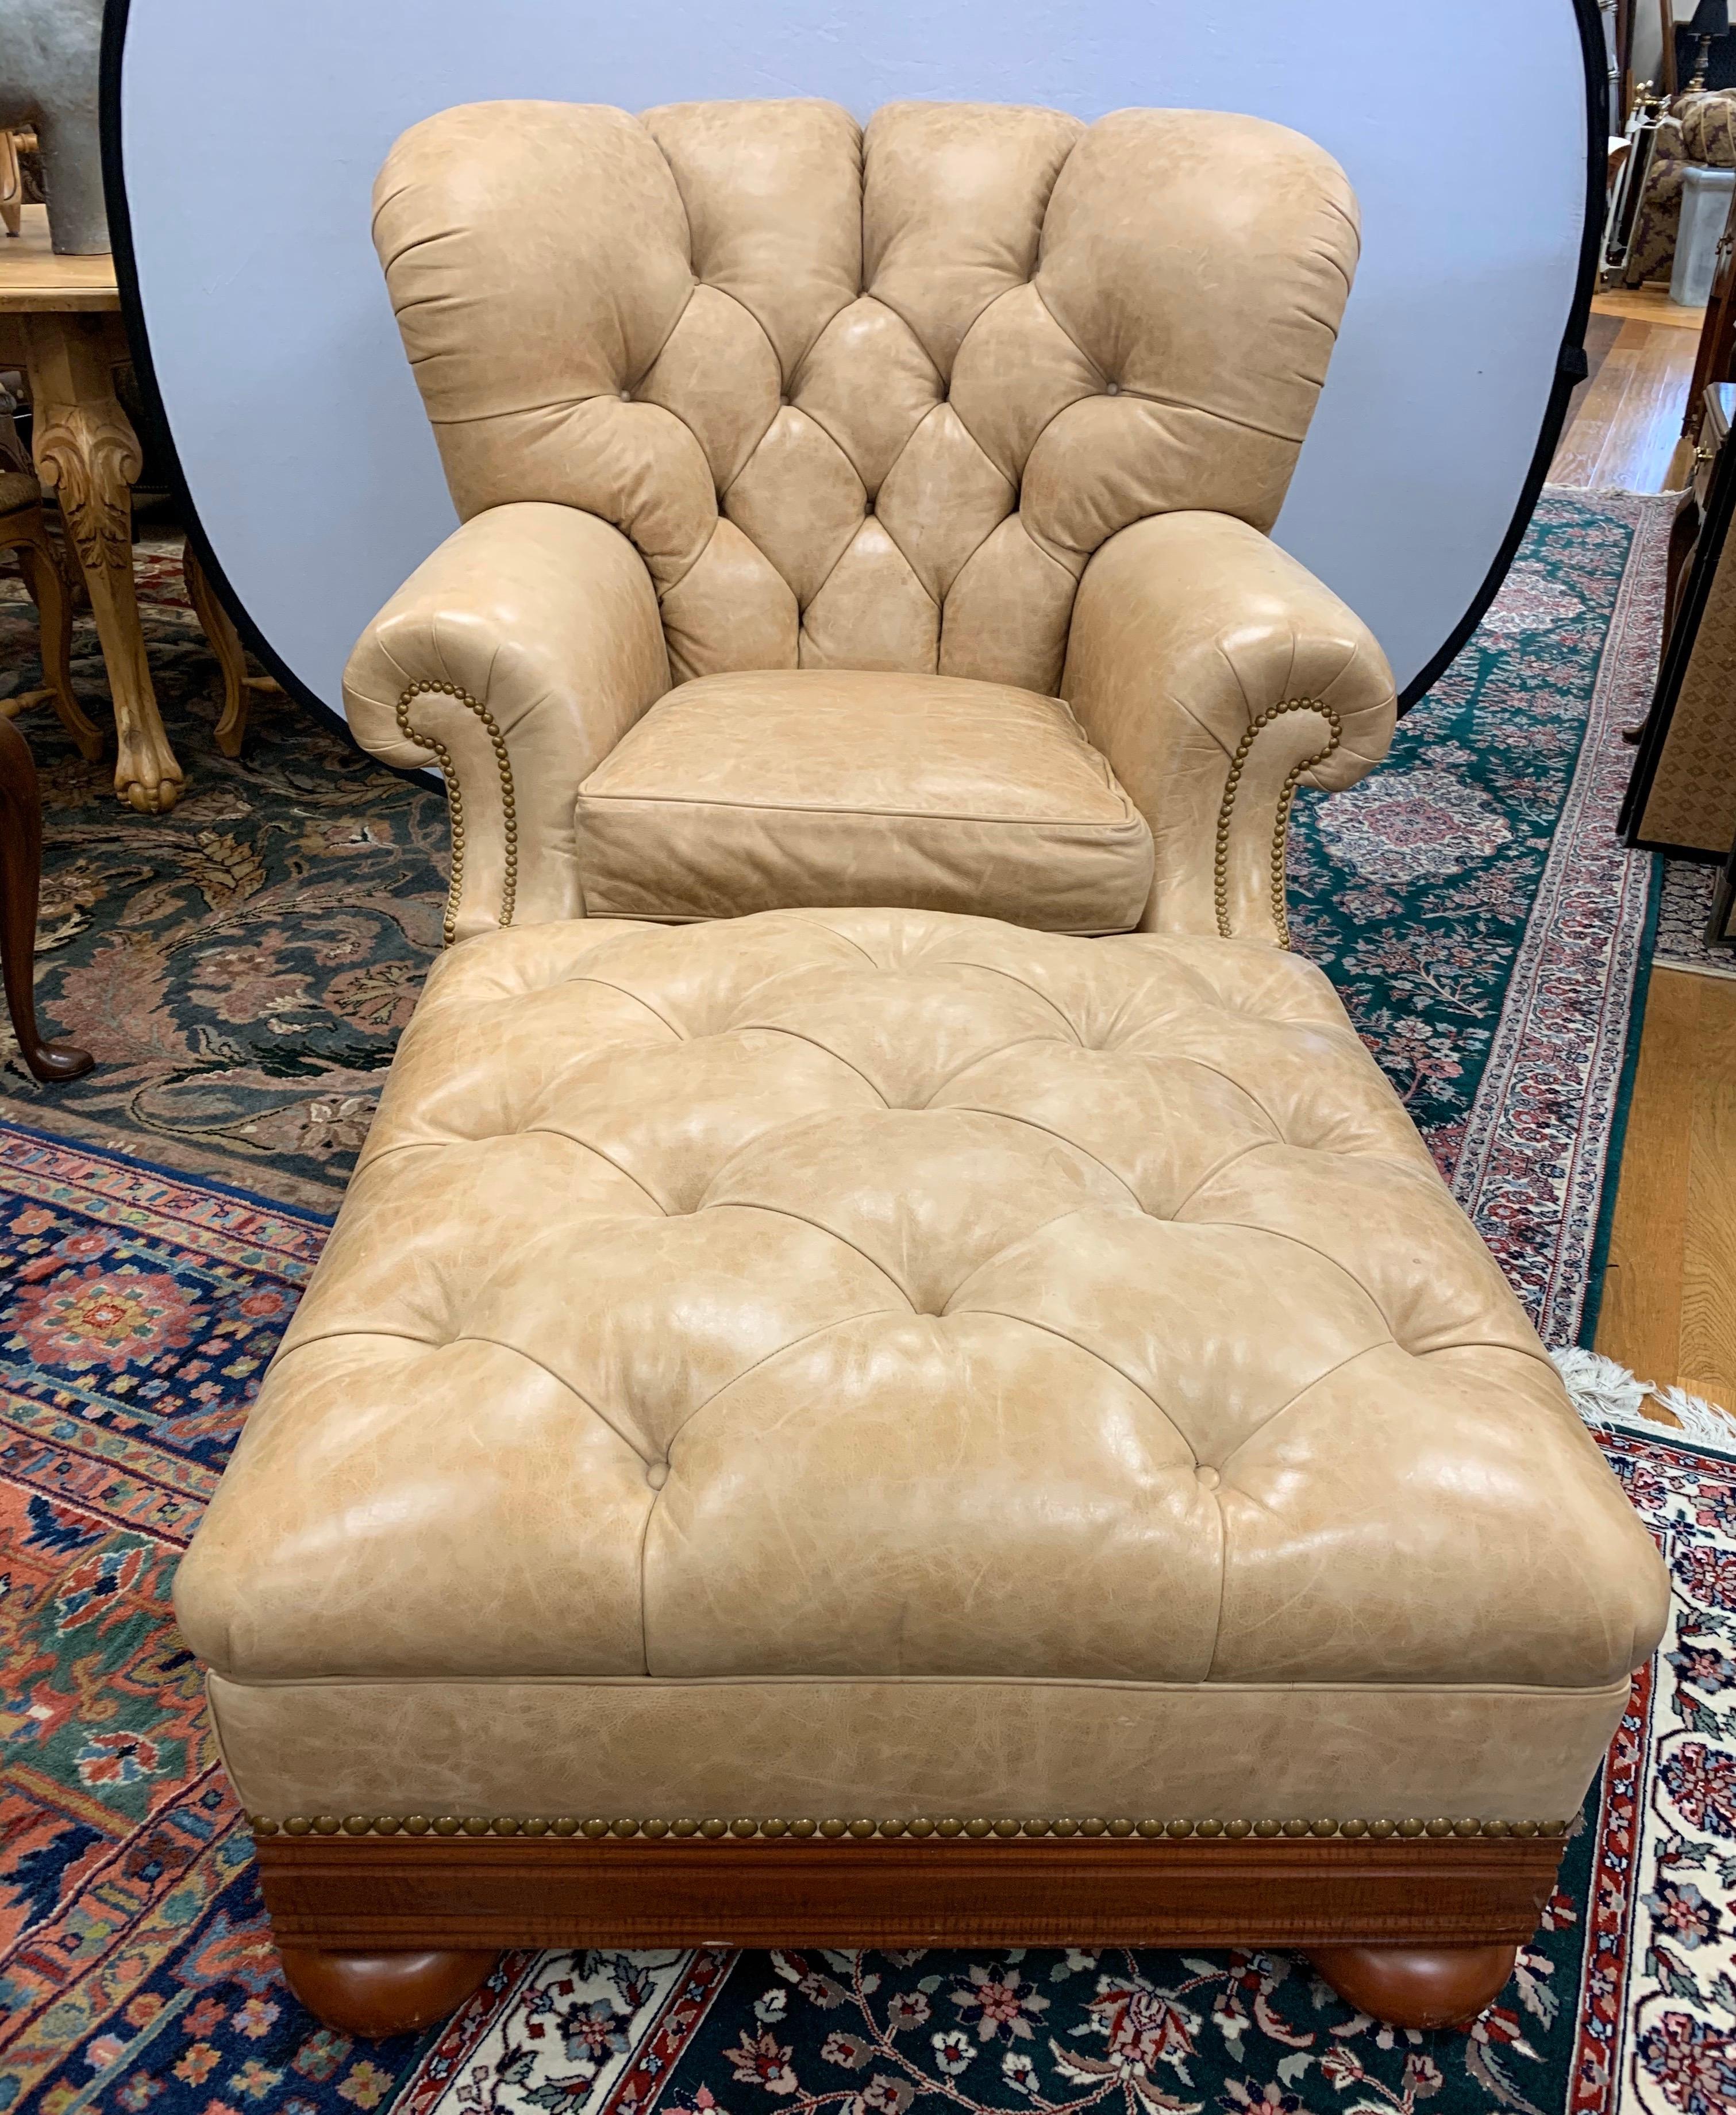 This Ralph Lauren labelled tufted club chair and matching ottoman has gorgeous Brunschwig & Fils leather, very thick, yet soft and top of the line quality. This chair is the large scale wingback and its Silhouette is often copied but there is a